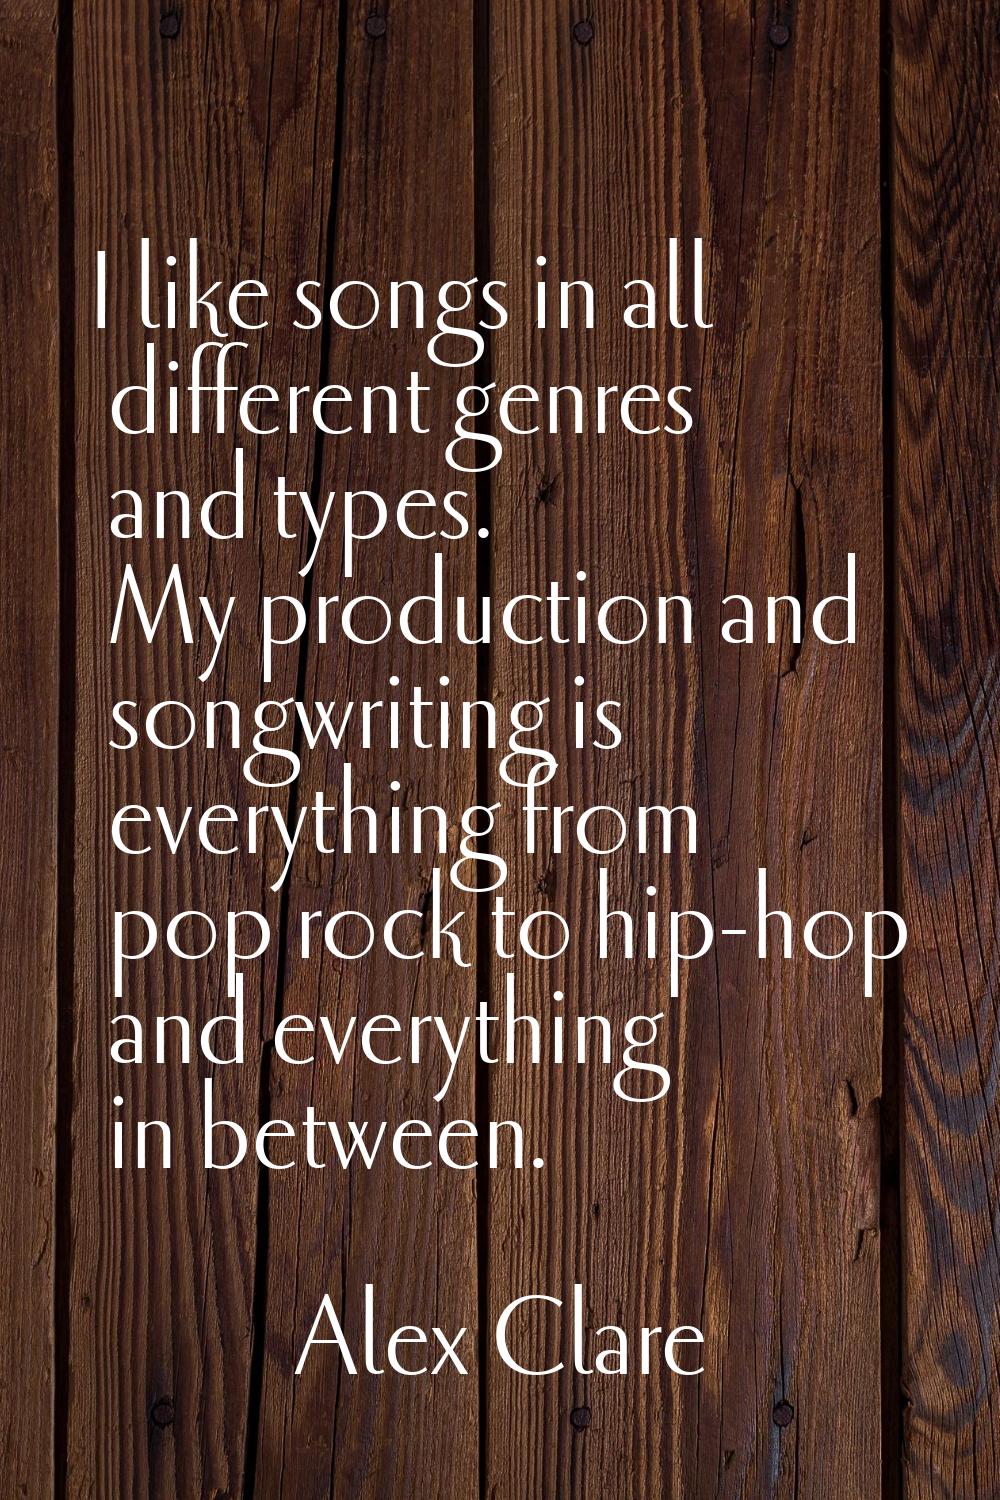 I like songs in all different genres and types. My production and songwriting is everything from po